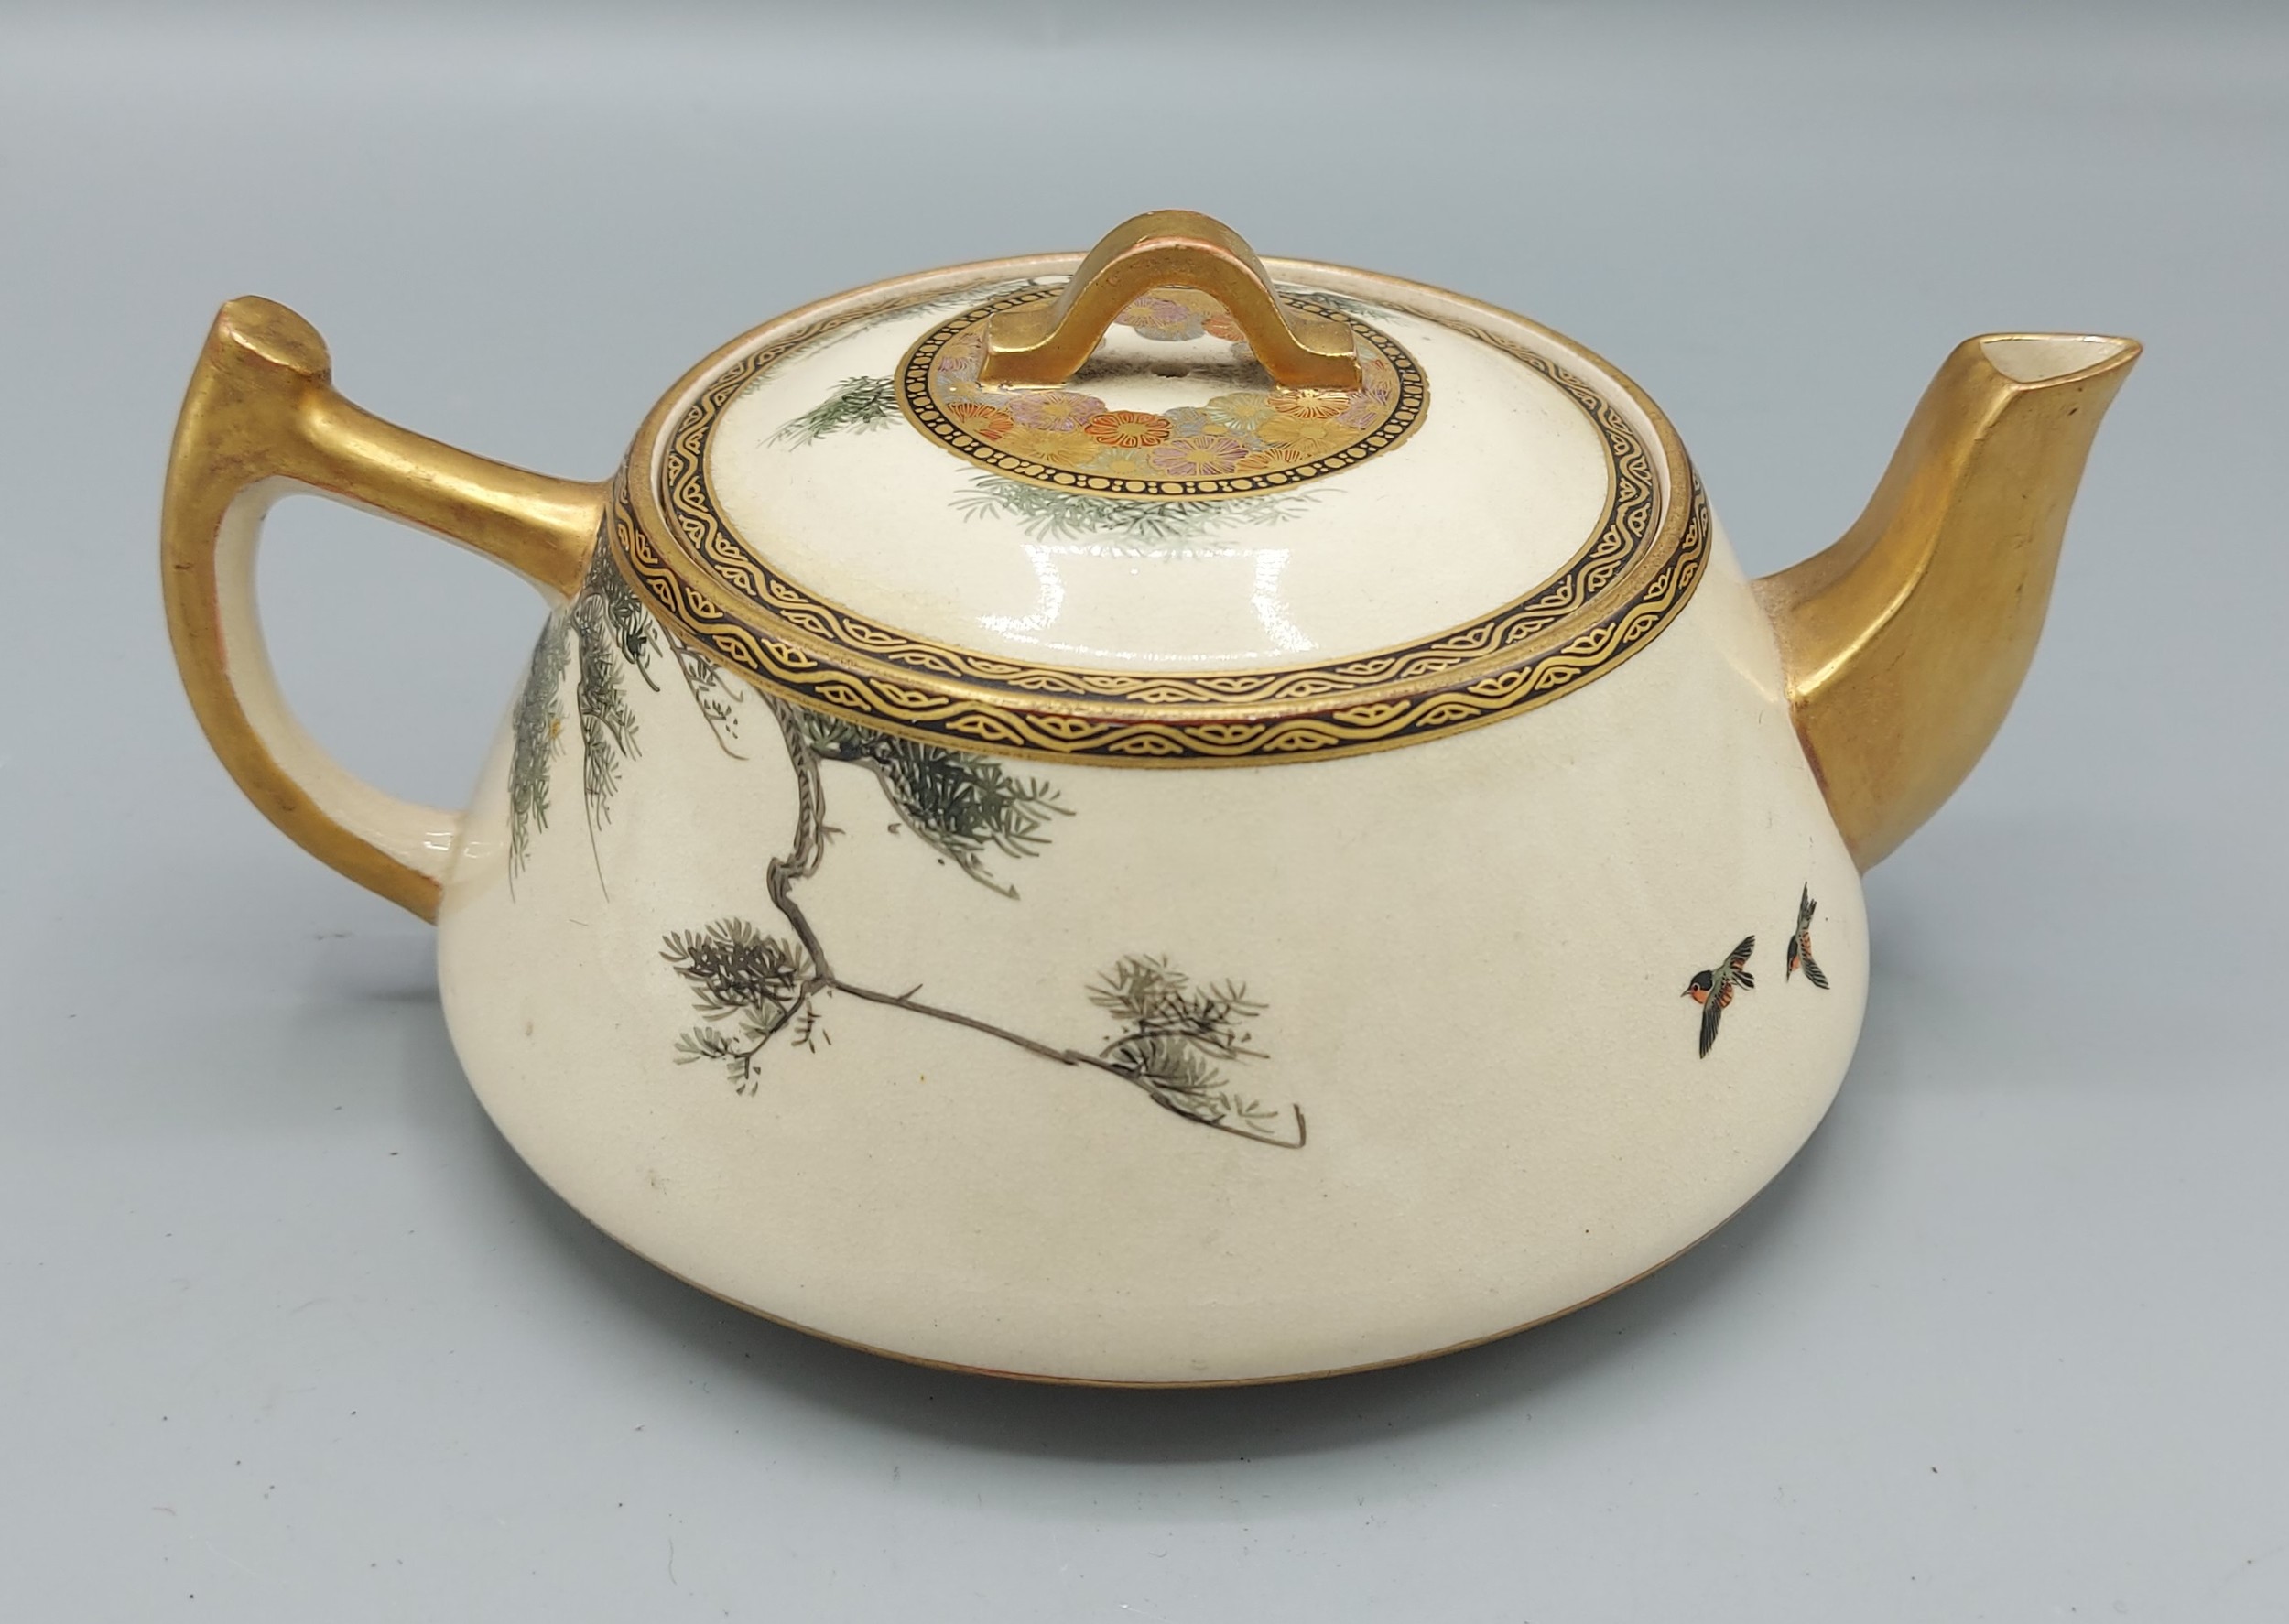 A Satsuma earthenware teapot decorated with birds amongst foliage highlighted with gilt - Image 3 of 3